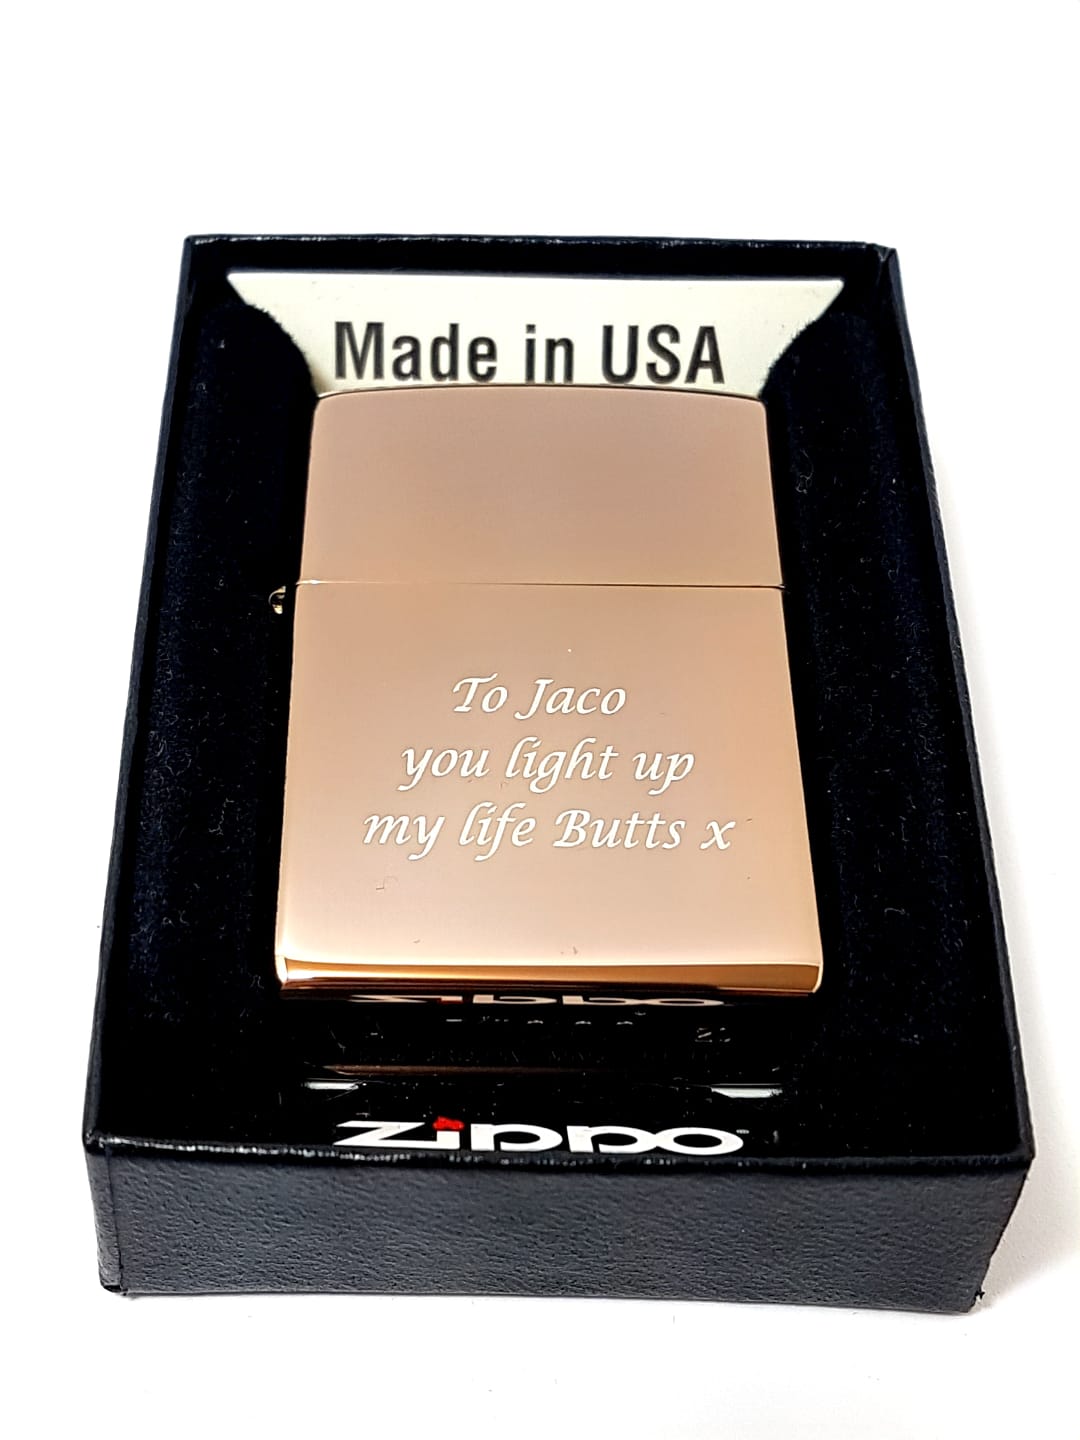 Personalised High Polish Rose Gold Zippo Lighter - A Touch of Luxury and Elegance